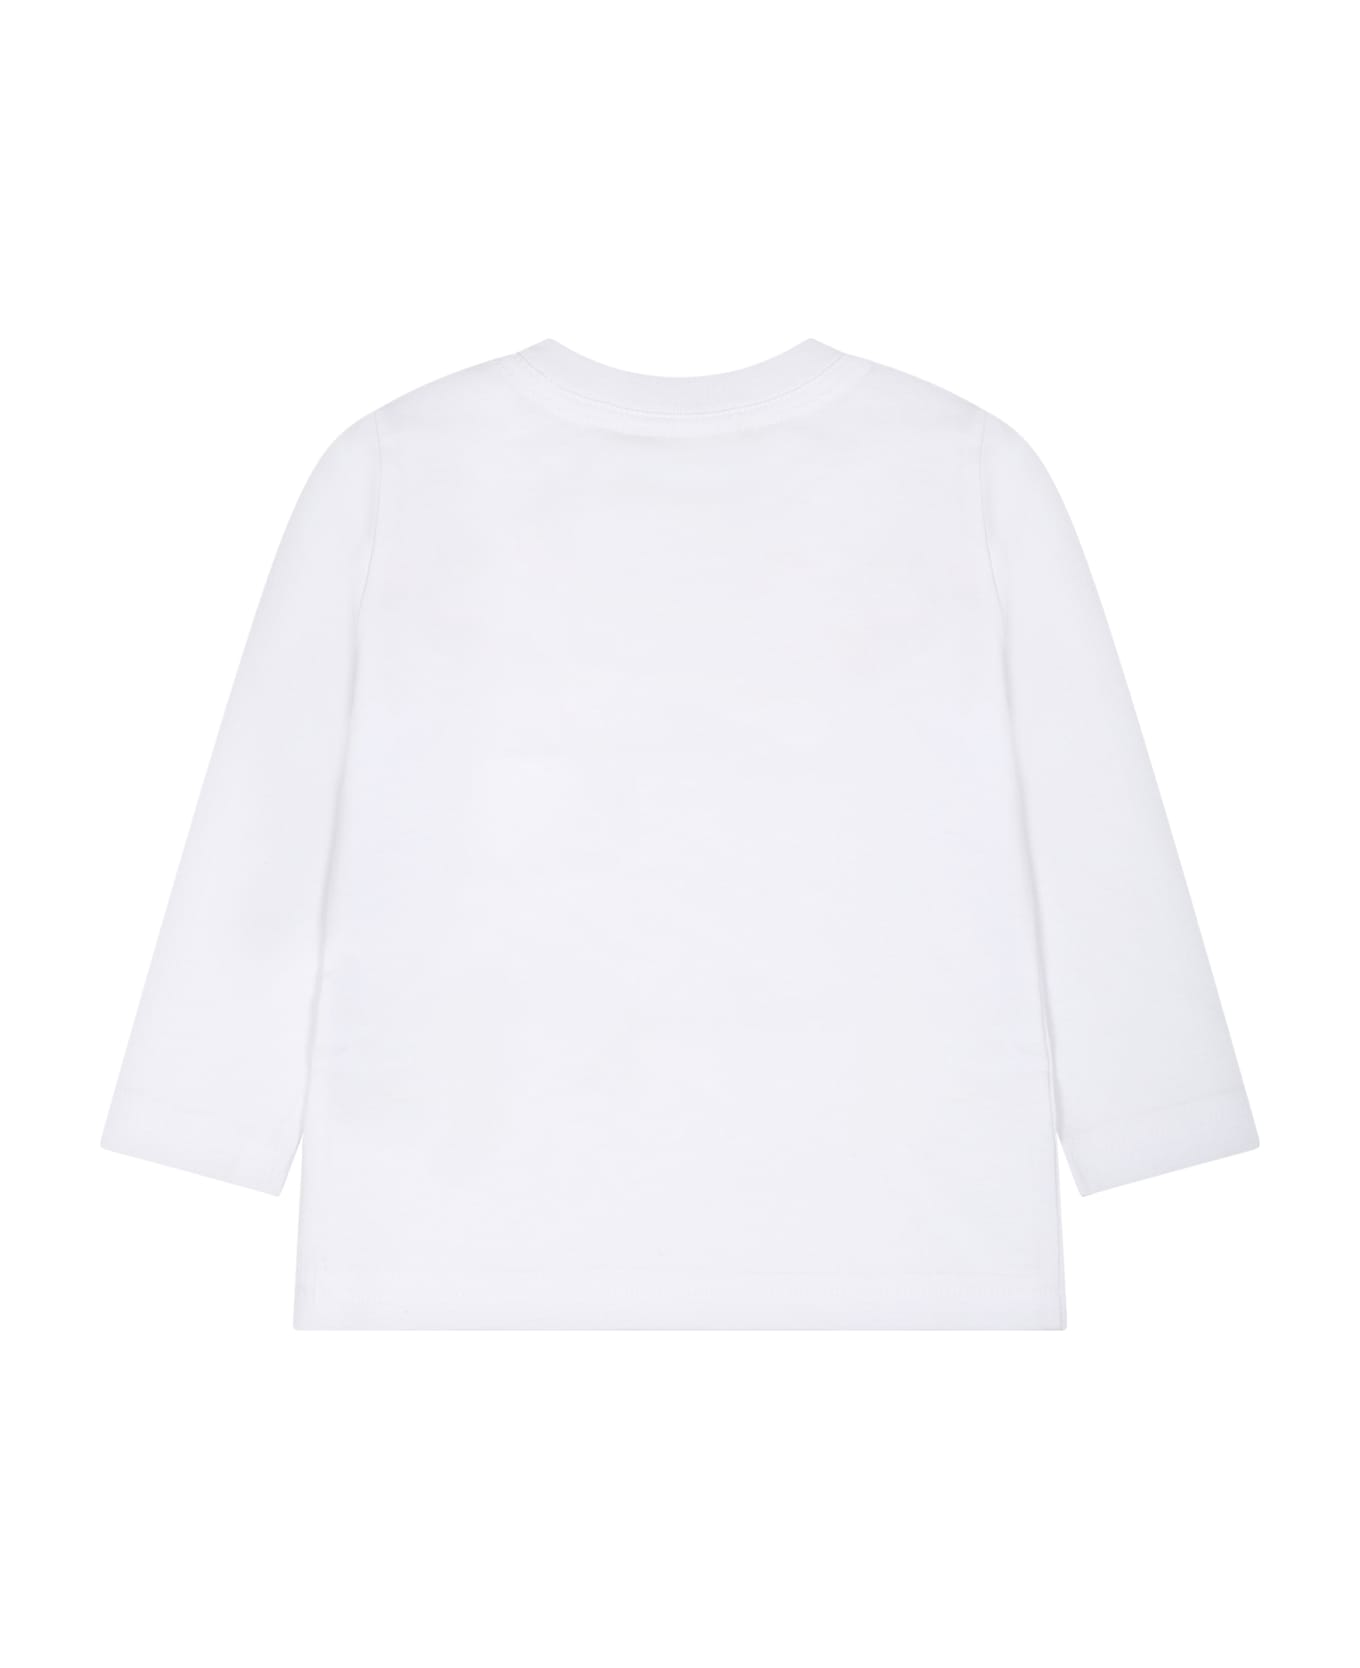 Dsquared2 White T-shirti For Baby Boy With Logo - White